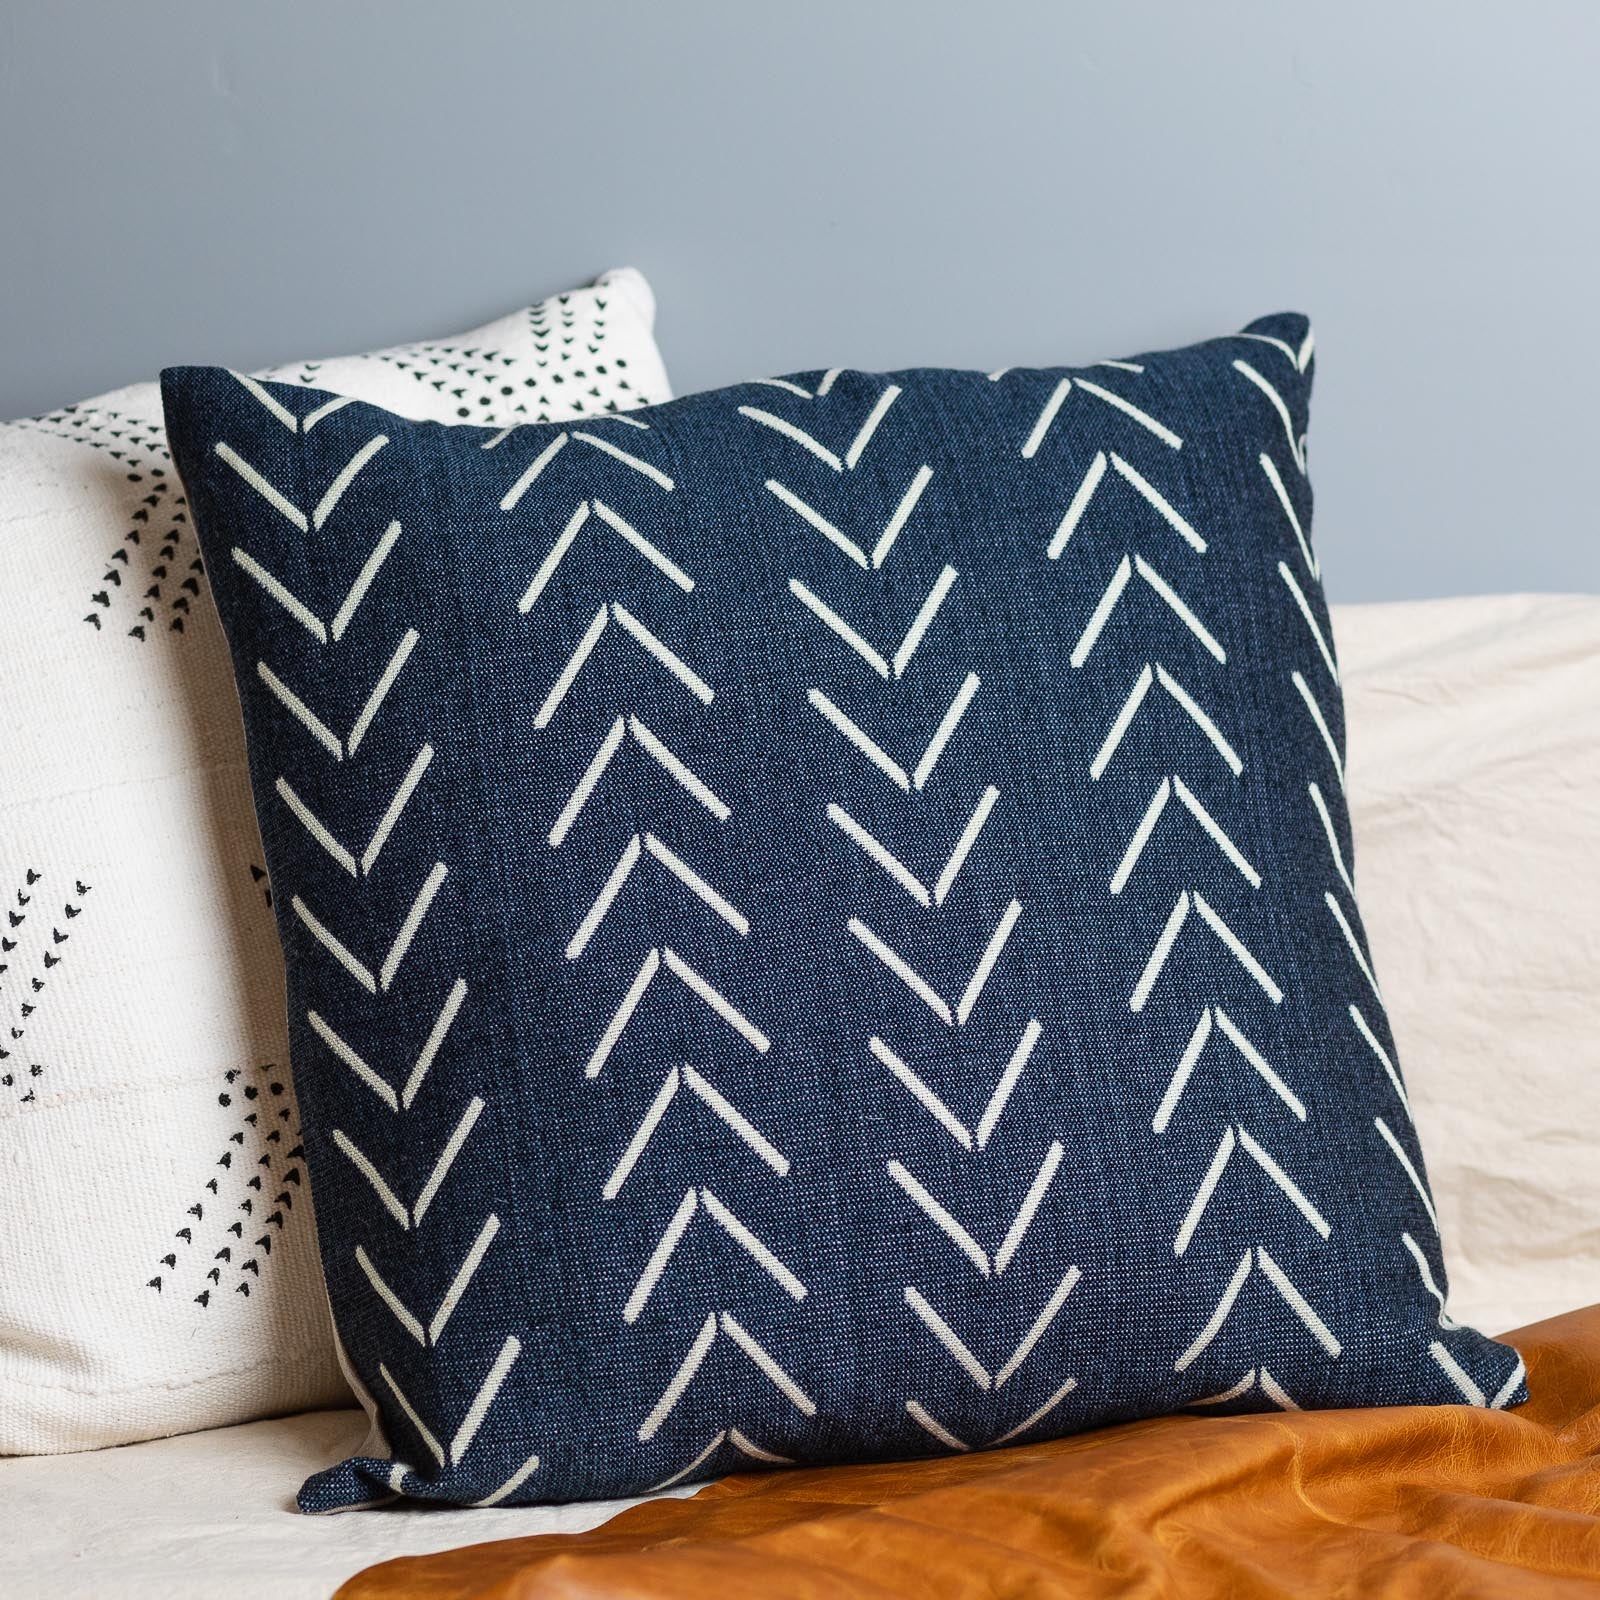 Alpaca Square Pillow, Navy with Chevrons